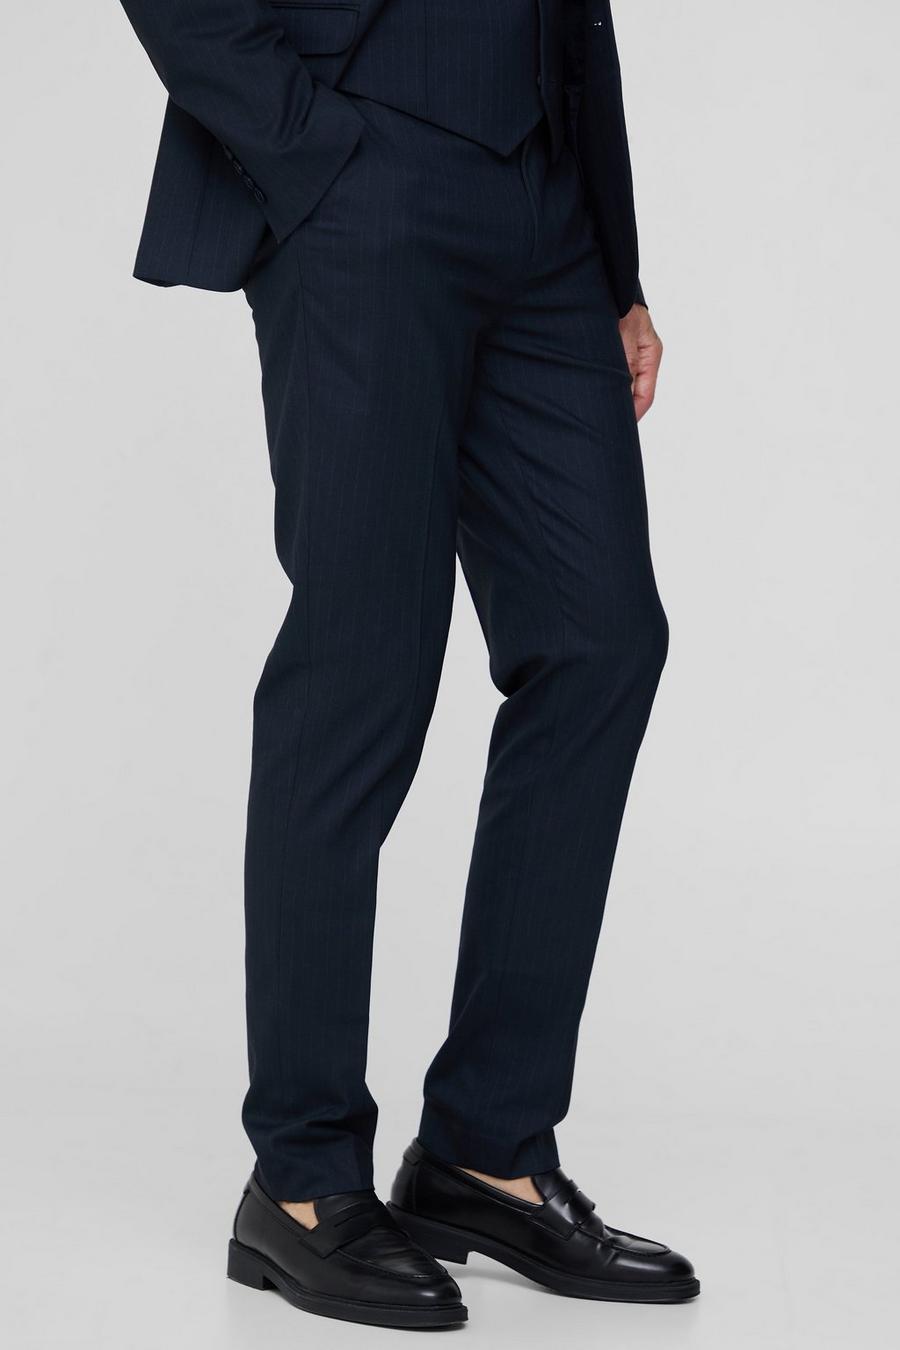 Tall Navy Pinstripe Slim Fit Suit Trouser